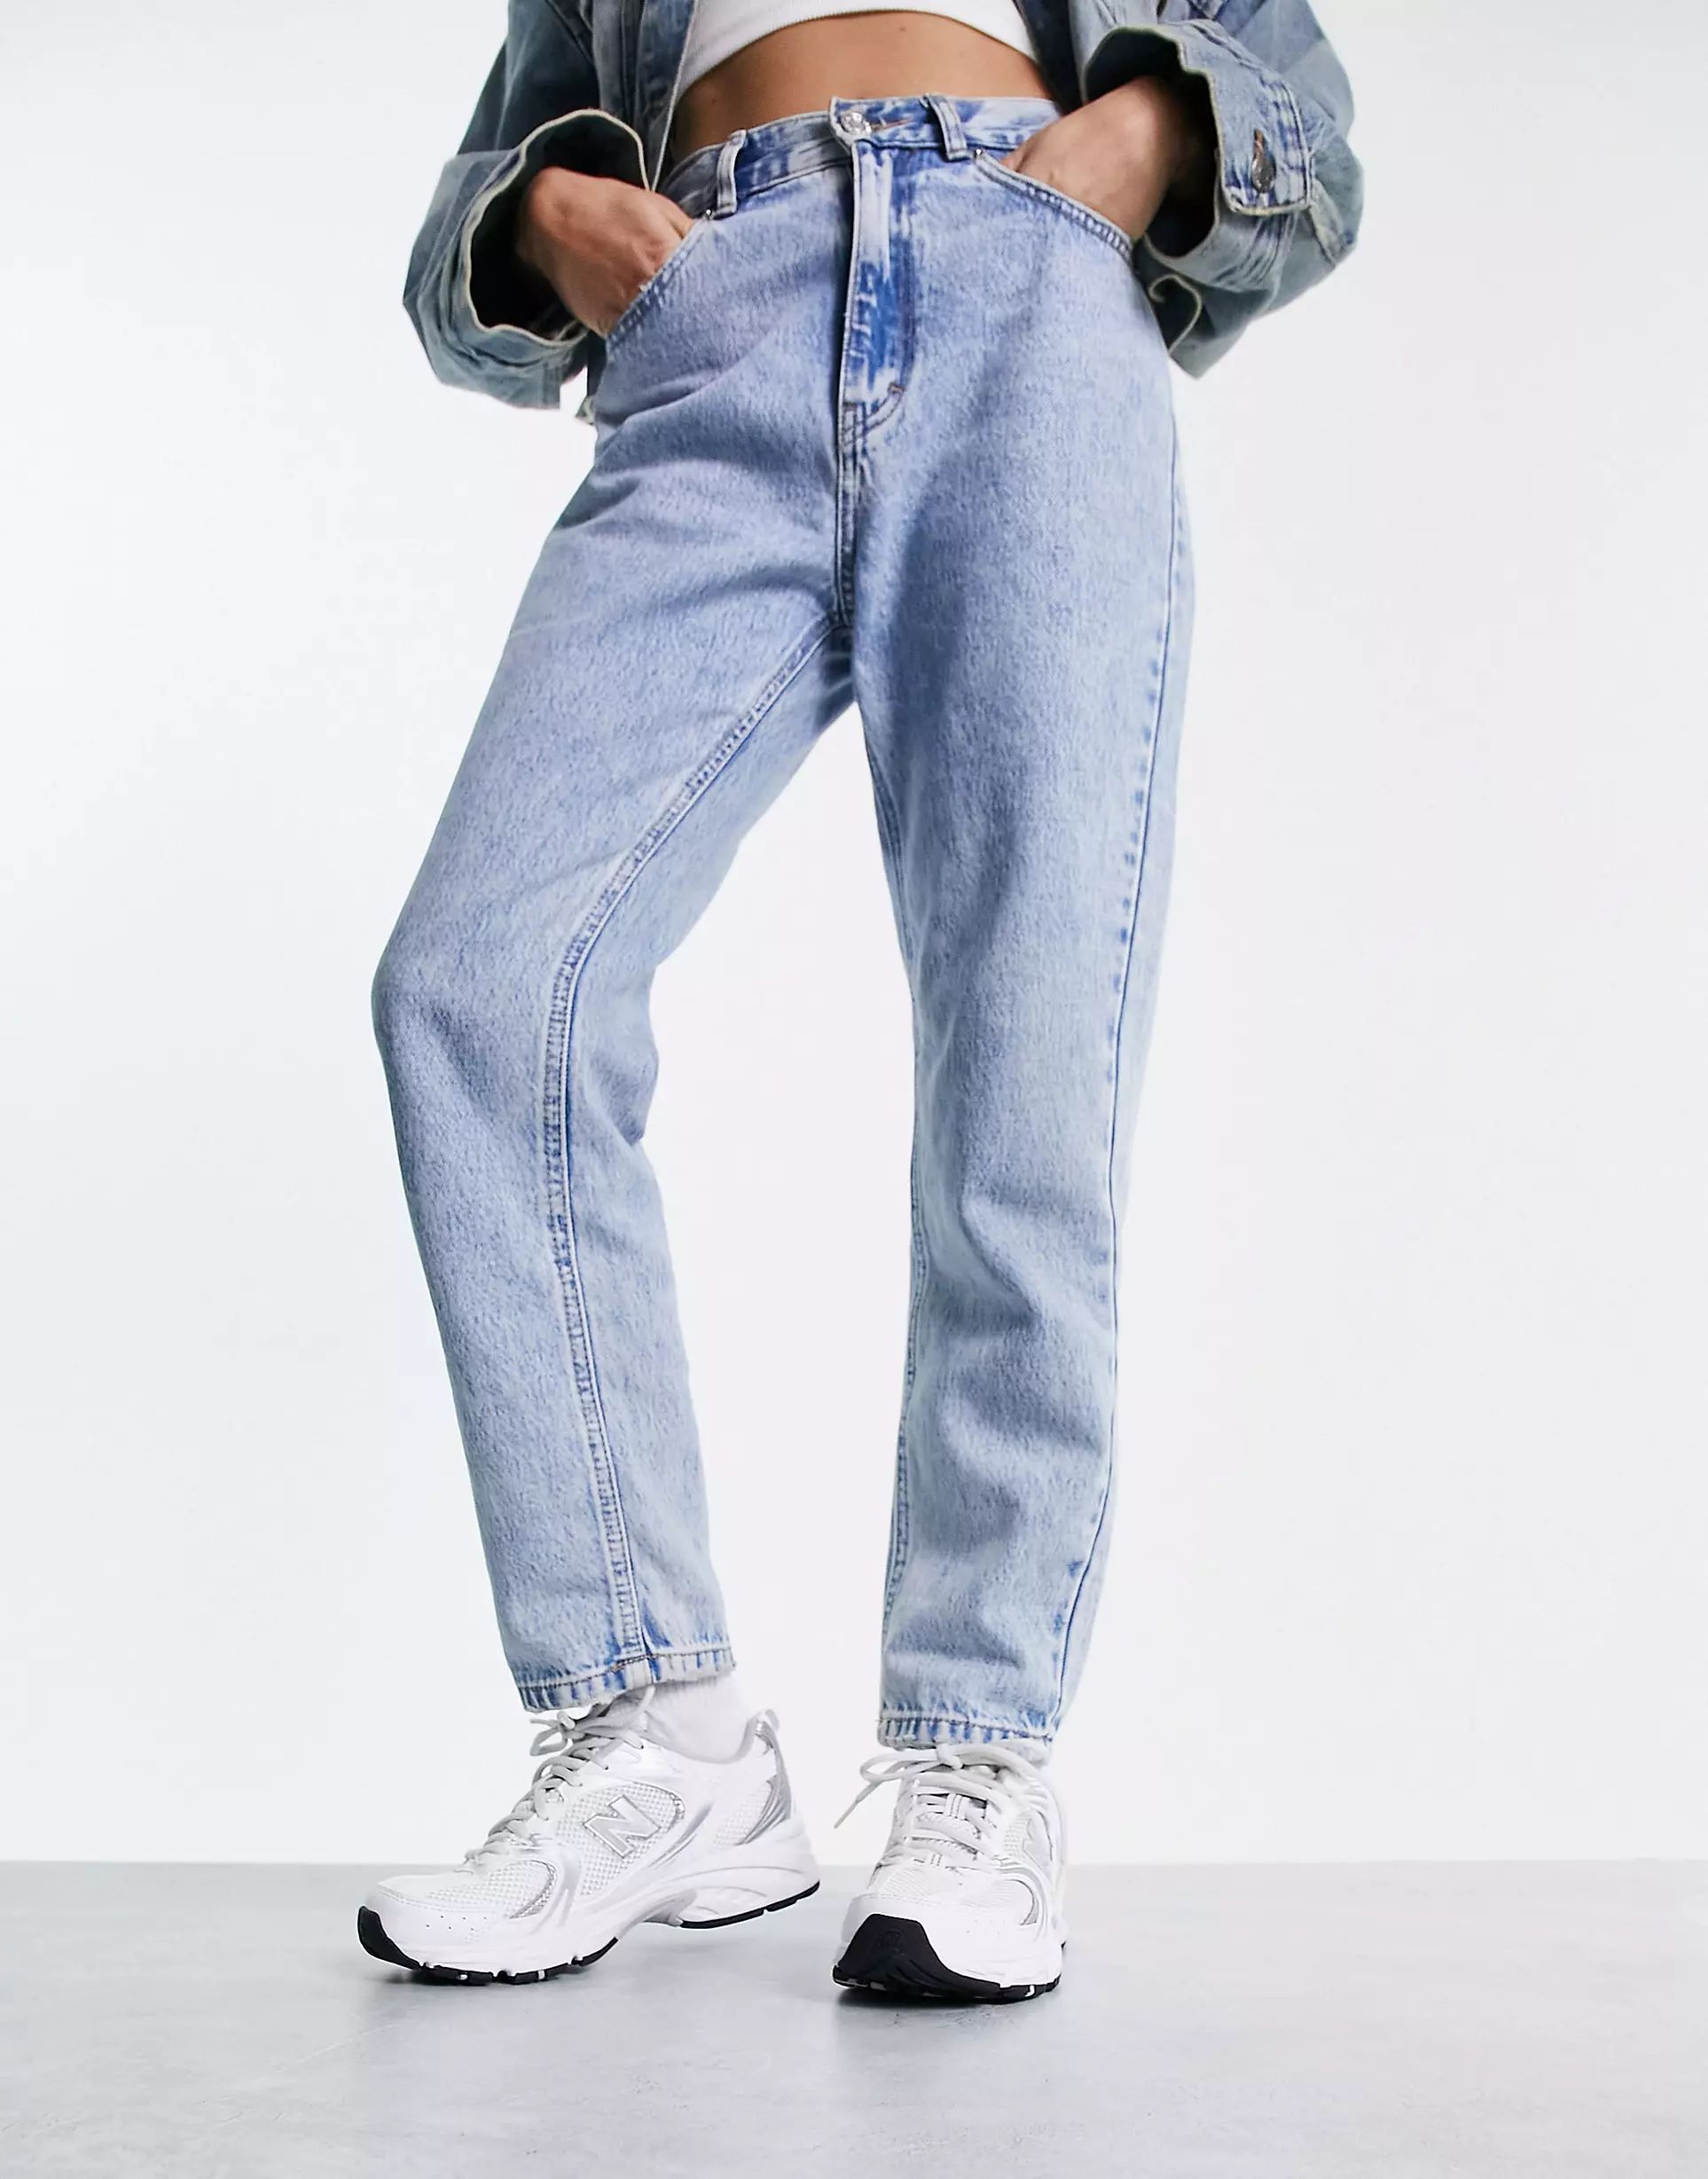 New Balance 530 sneakers in white and silver - WHITE | ASOS (Global)